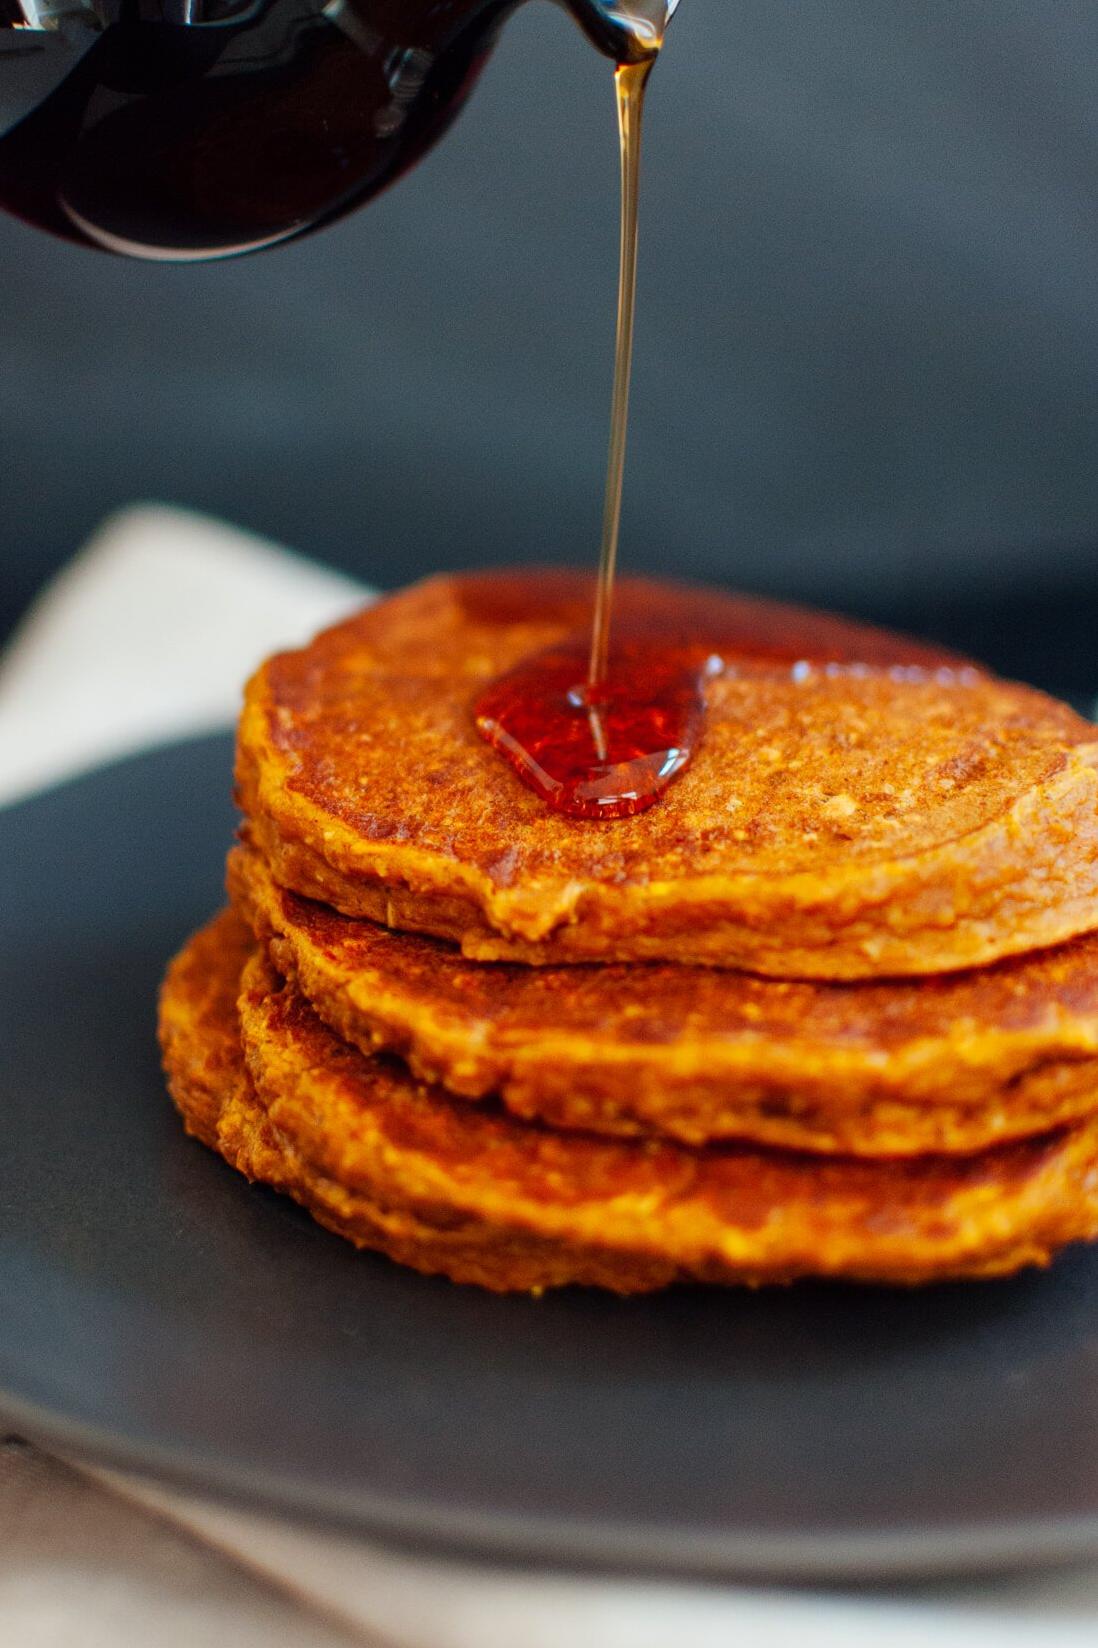  Deliciously gluten-free pumpkin pancakes that are sure to impress!